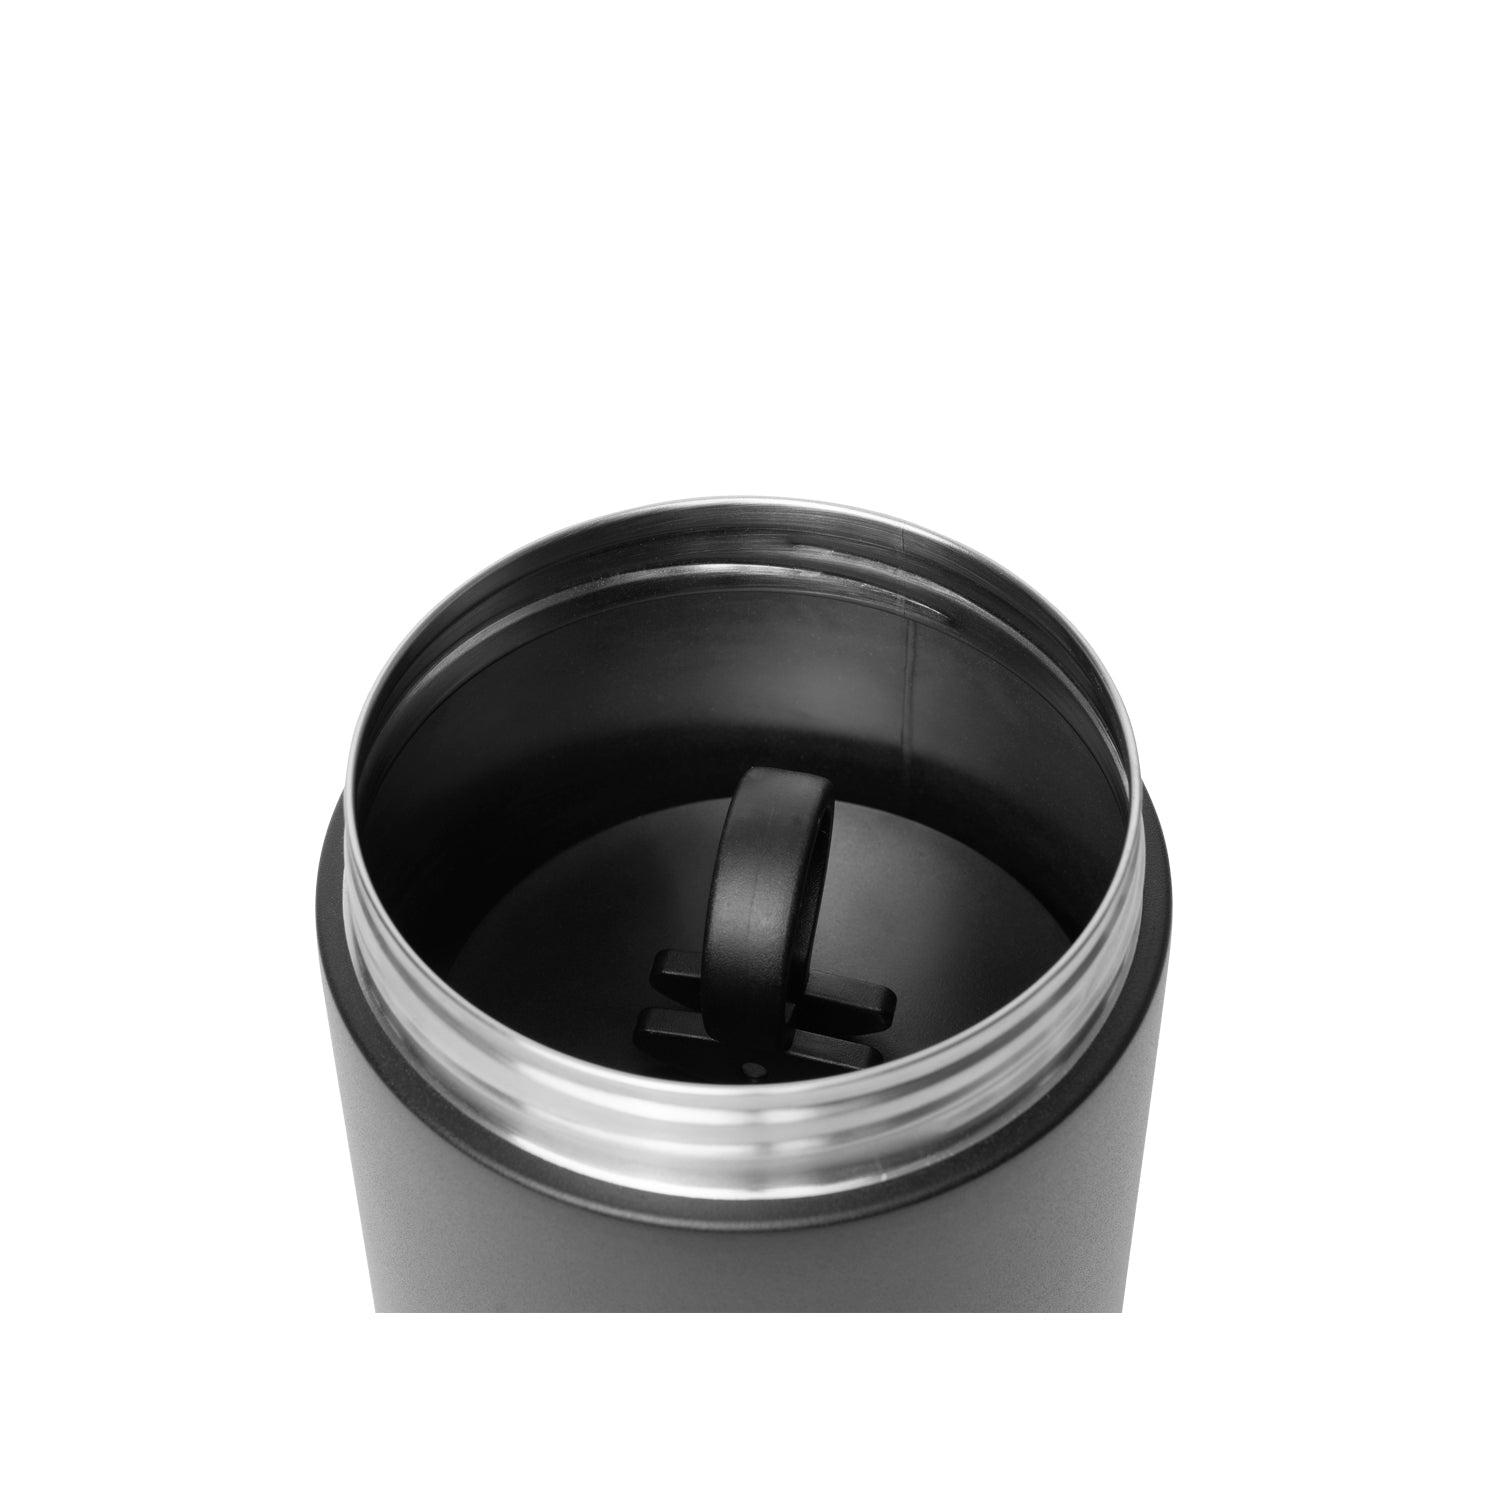 Airtight coffee container - Matte black - Holds 1 lb whole beans